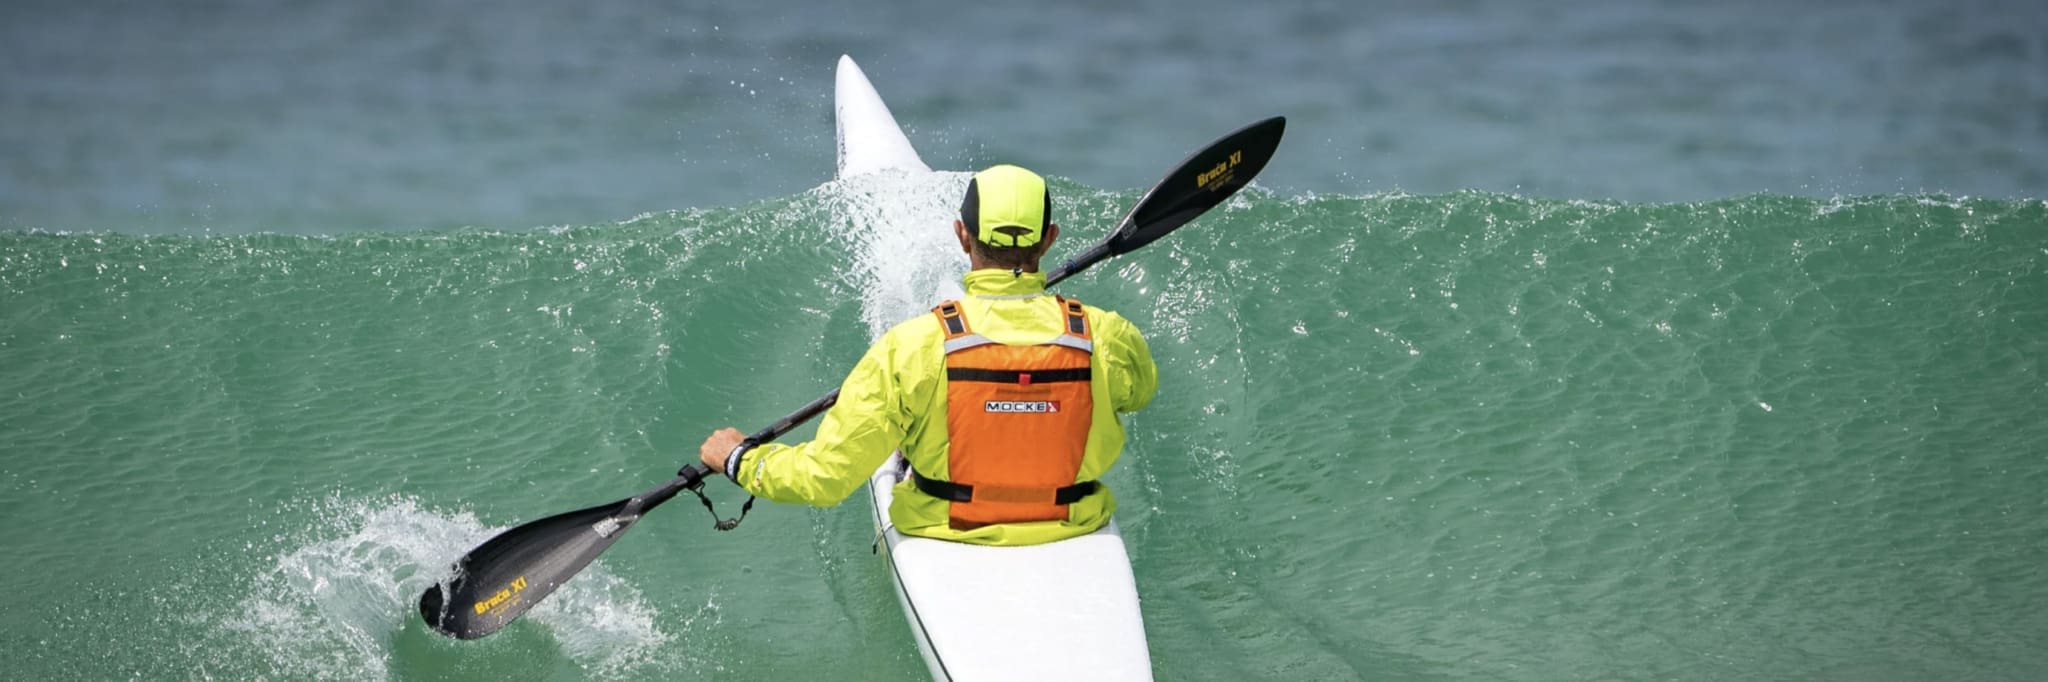 best surfski paddles and accessories!